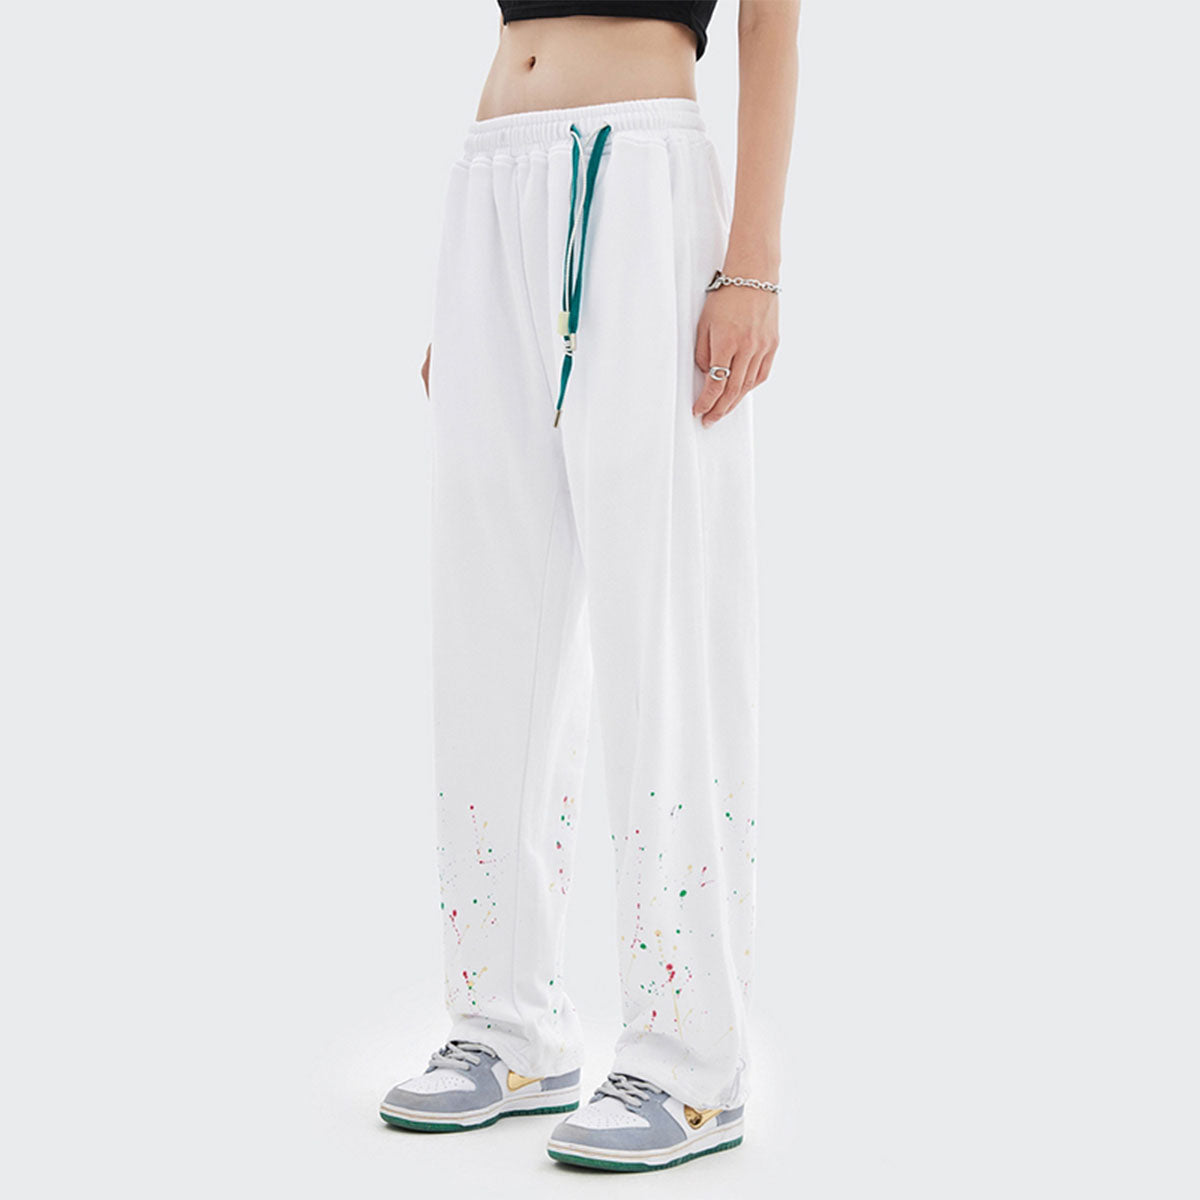 Buy Casual Drawstring Sports Straight Pants by Body404 by Body404